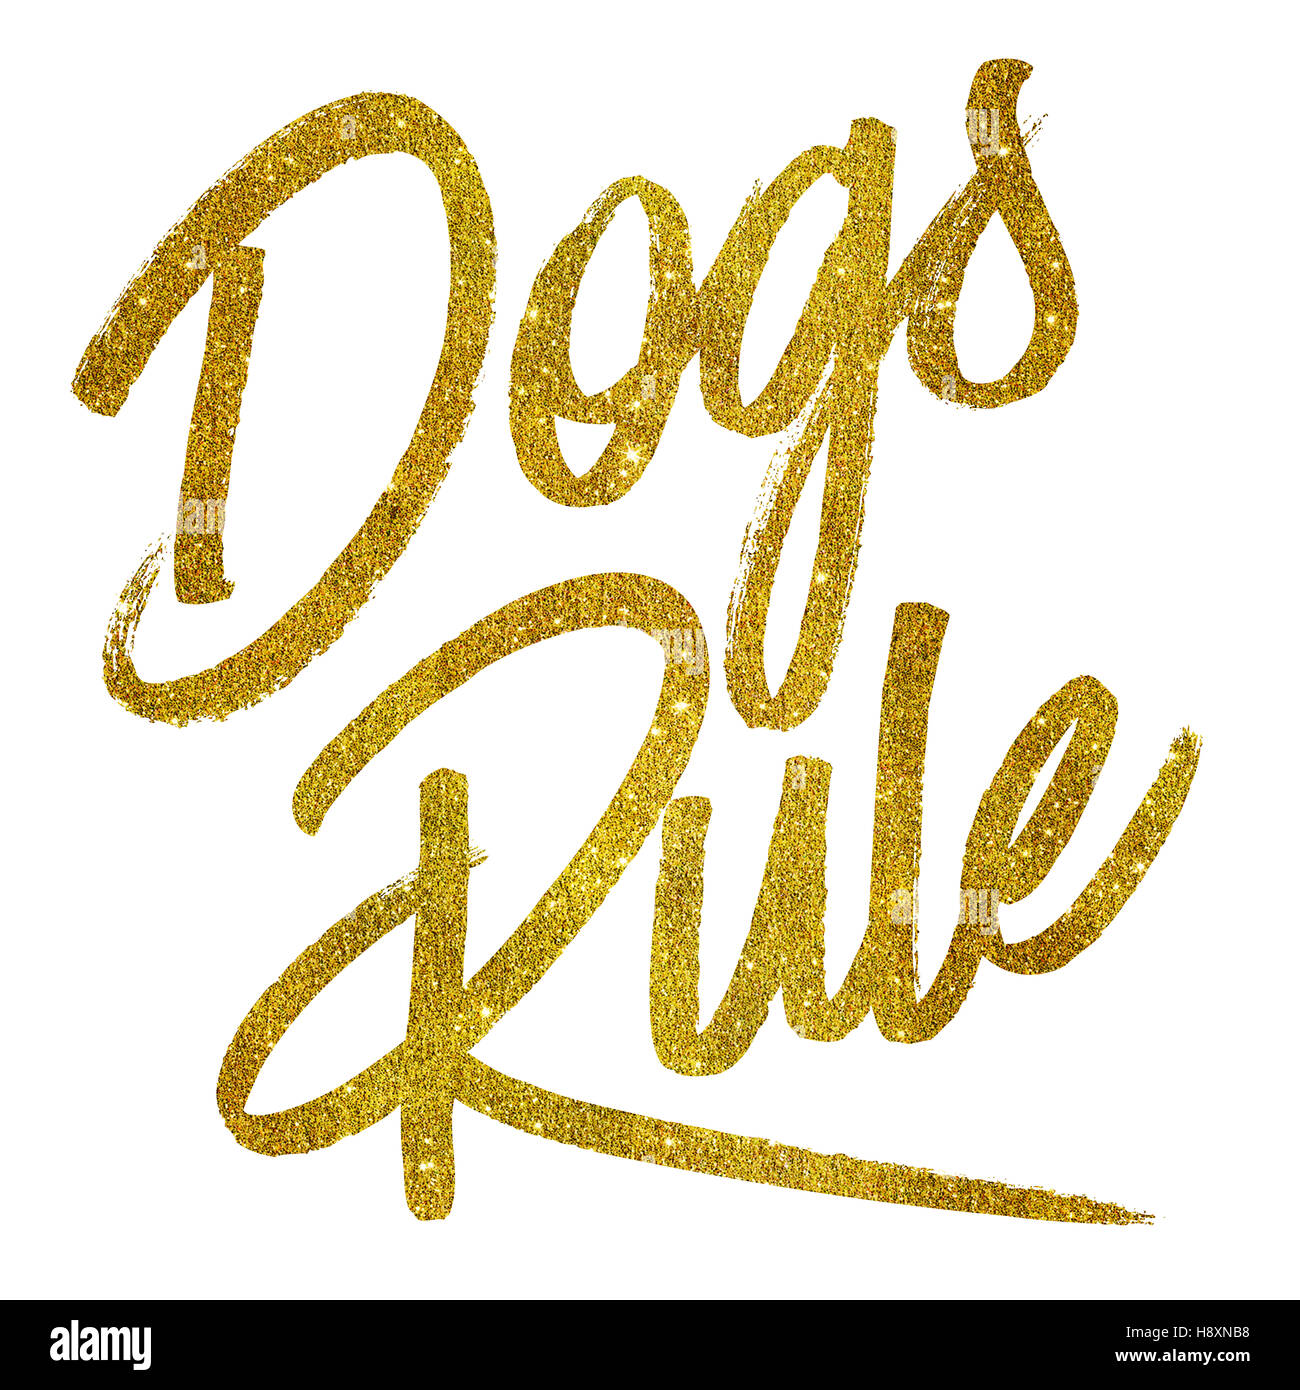 Dogs Rule Gold Faux Foil Metallic Glitter Quote Isolated Stock Photo